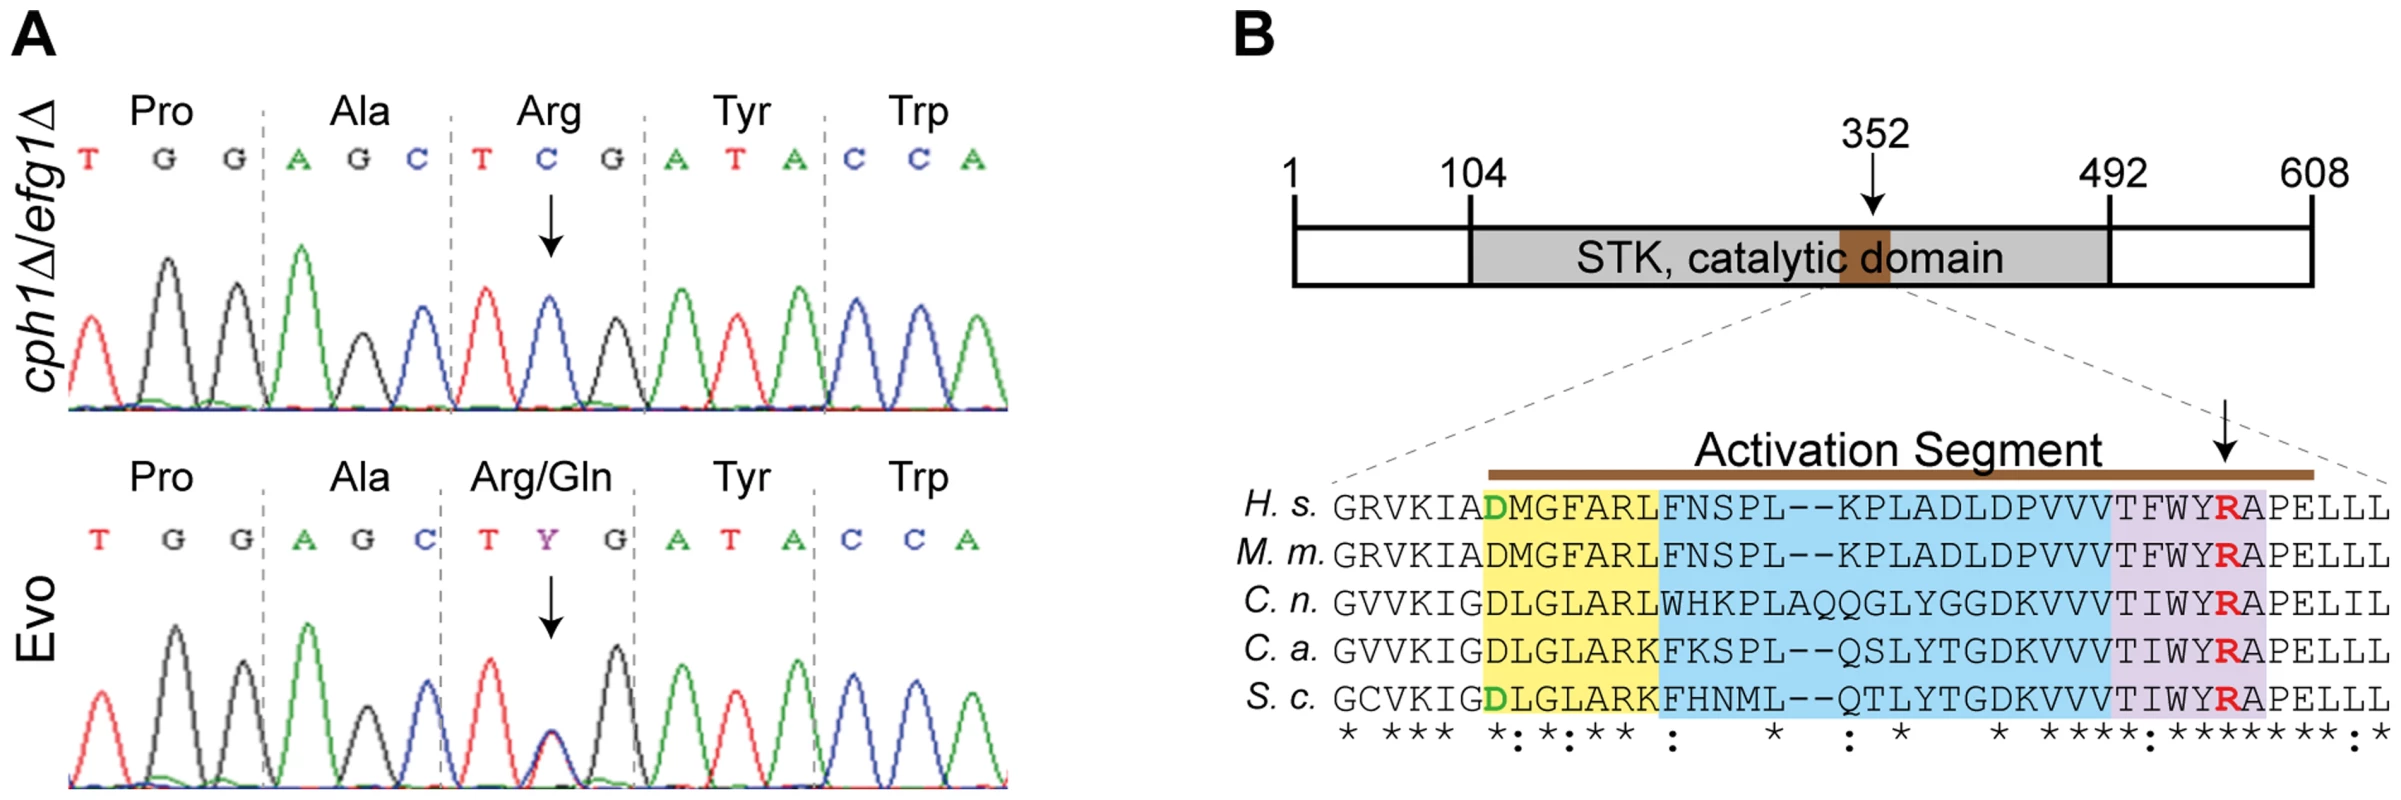 Single nucleotide polymorphism in <i>SSN3</i> of the Evo strain and location of the mutated amino acid.